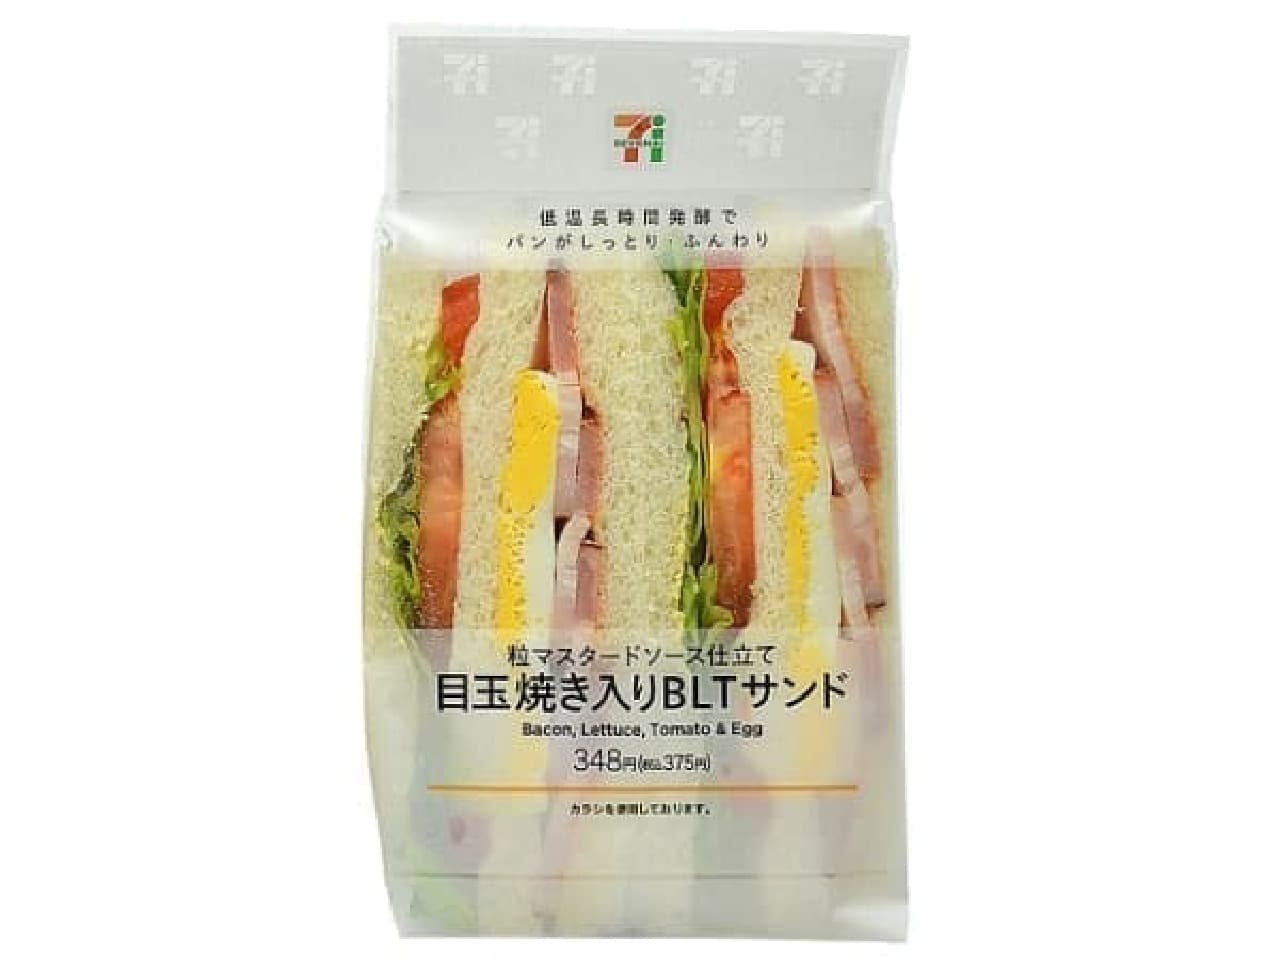 7-ELEVEN "BLT Sandwich with Fried Egg"